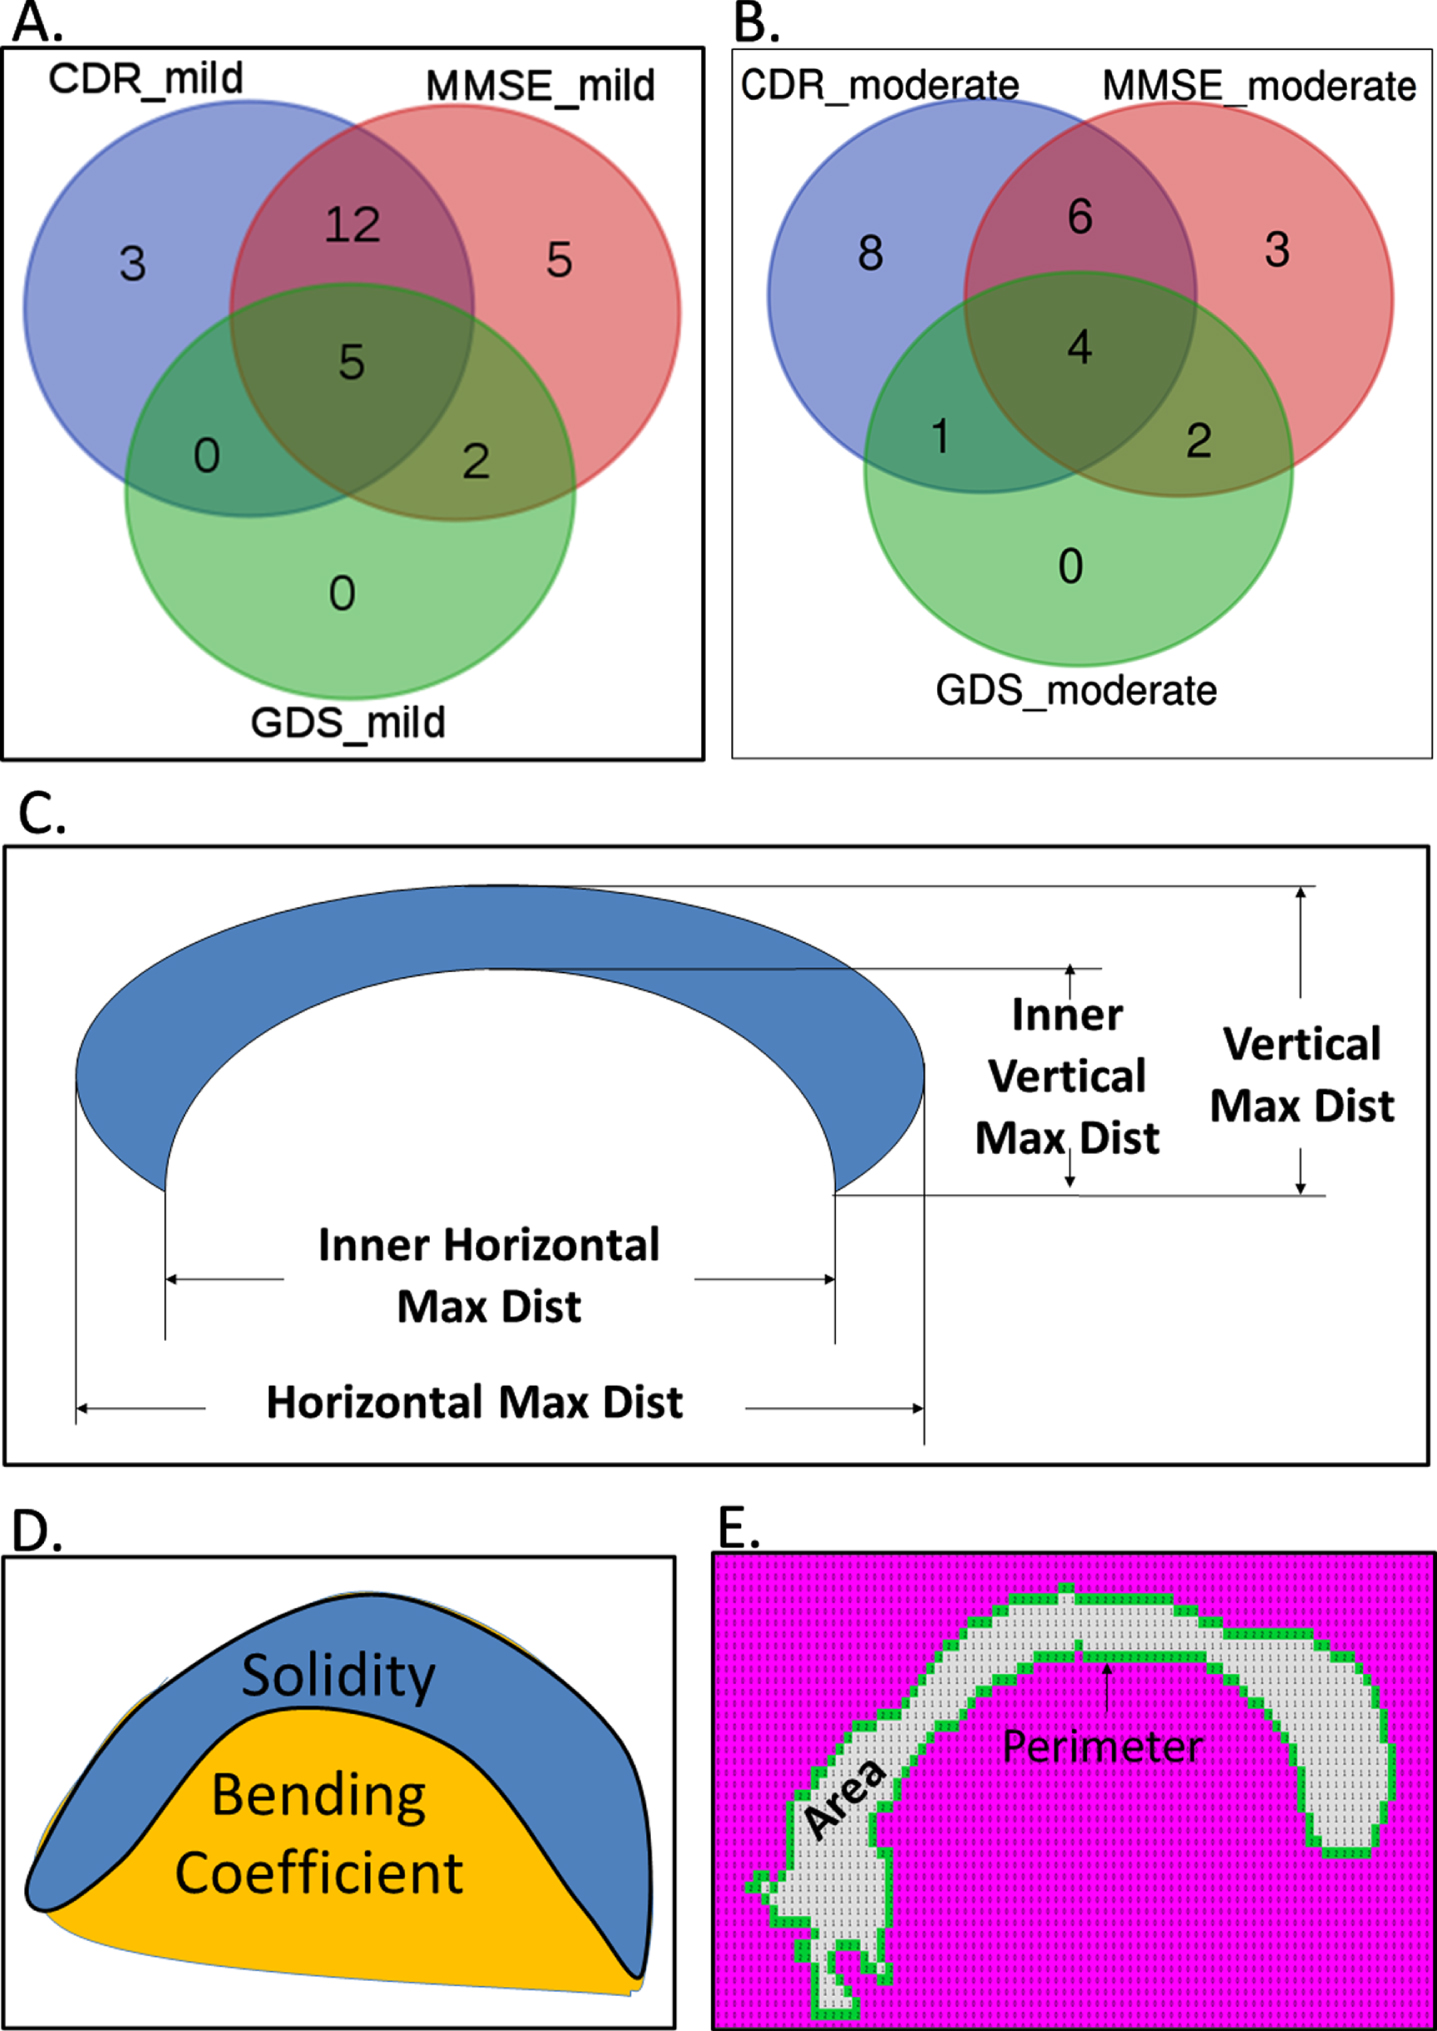 Structural and morphological features of corpus callosum (CC) that are significantly different between demented and healthy samples. Venn diagrams show the overlap of the CC features that were found to be significantly different (p < 0.01) between healthy and mild (A), healthy and moderate (B), respectively. Panel C, D, and E provide pictorial depiction of the measures of length and thickness, bending, and area of the CC regions, respectively.